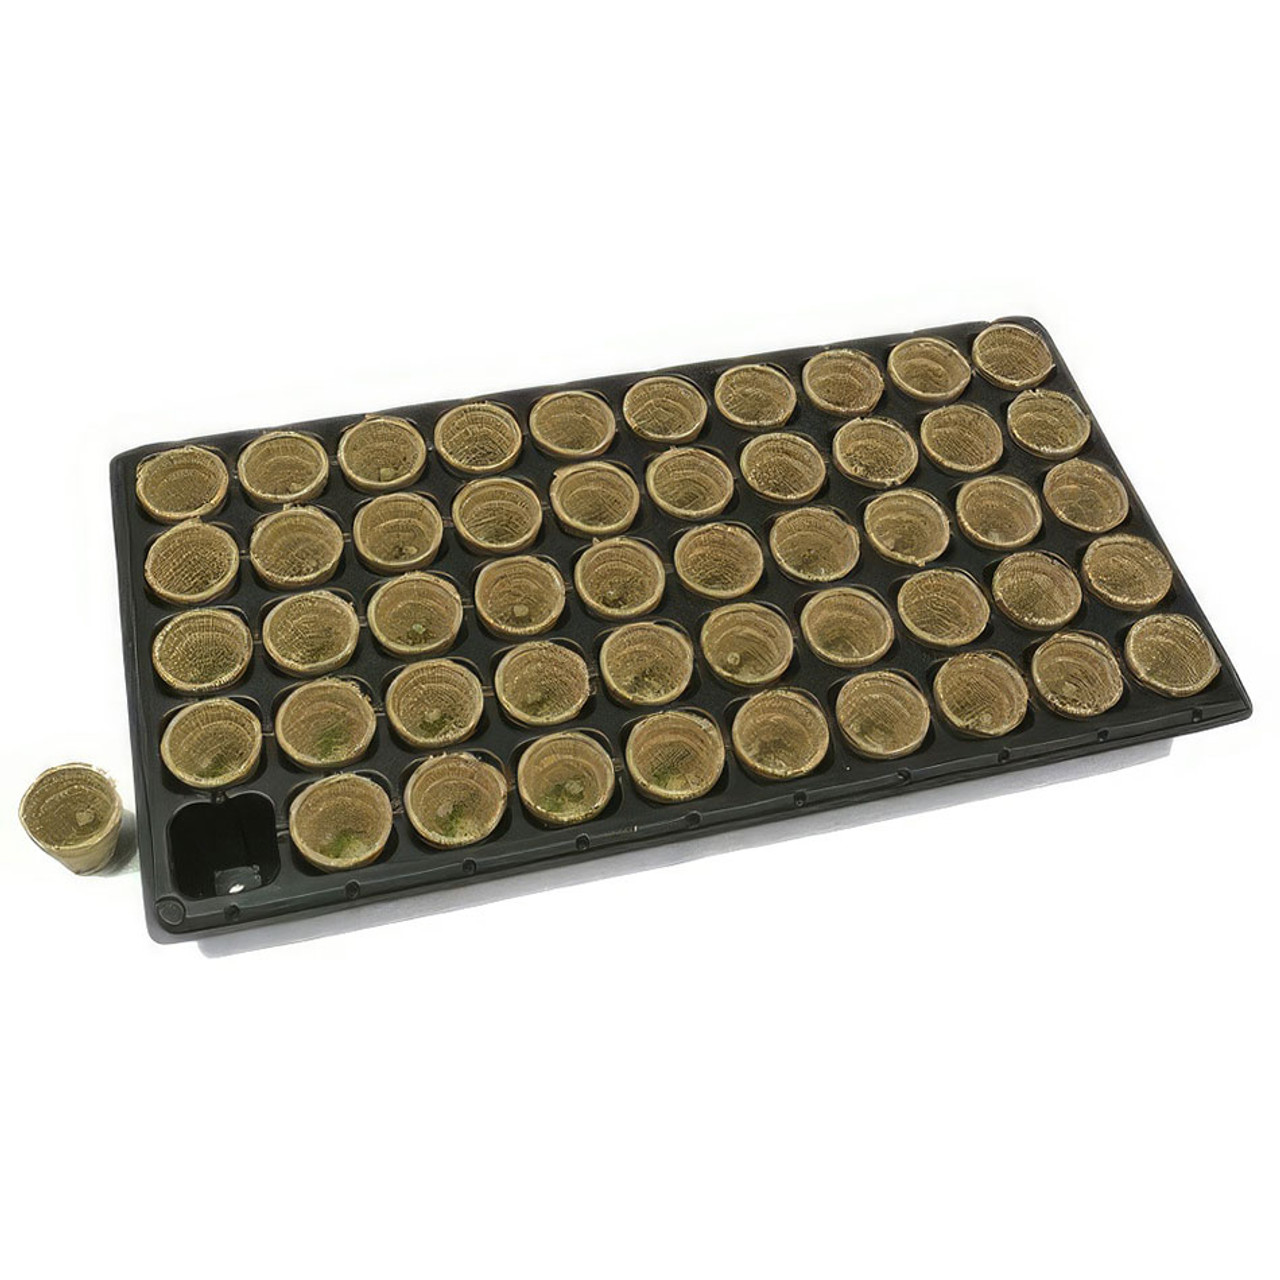 COCO PLUGS 36MM TRAY OF 50 CELLS